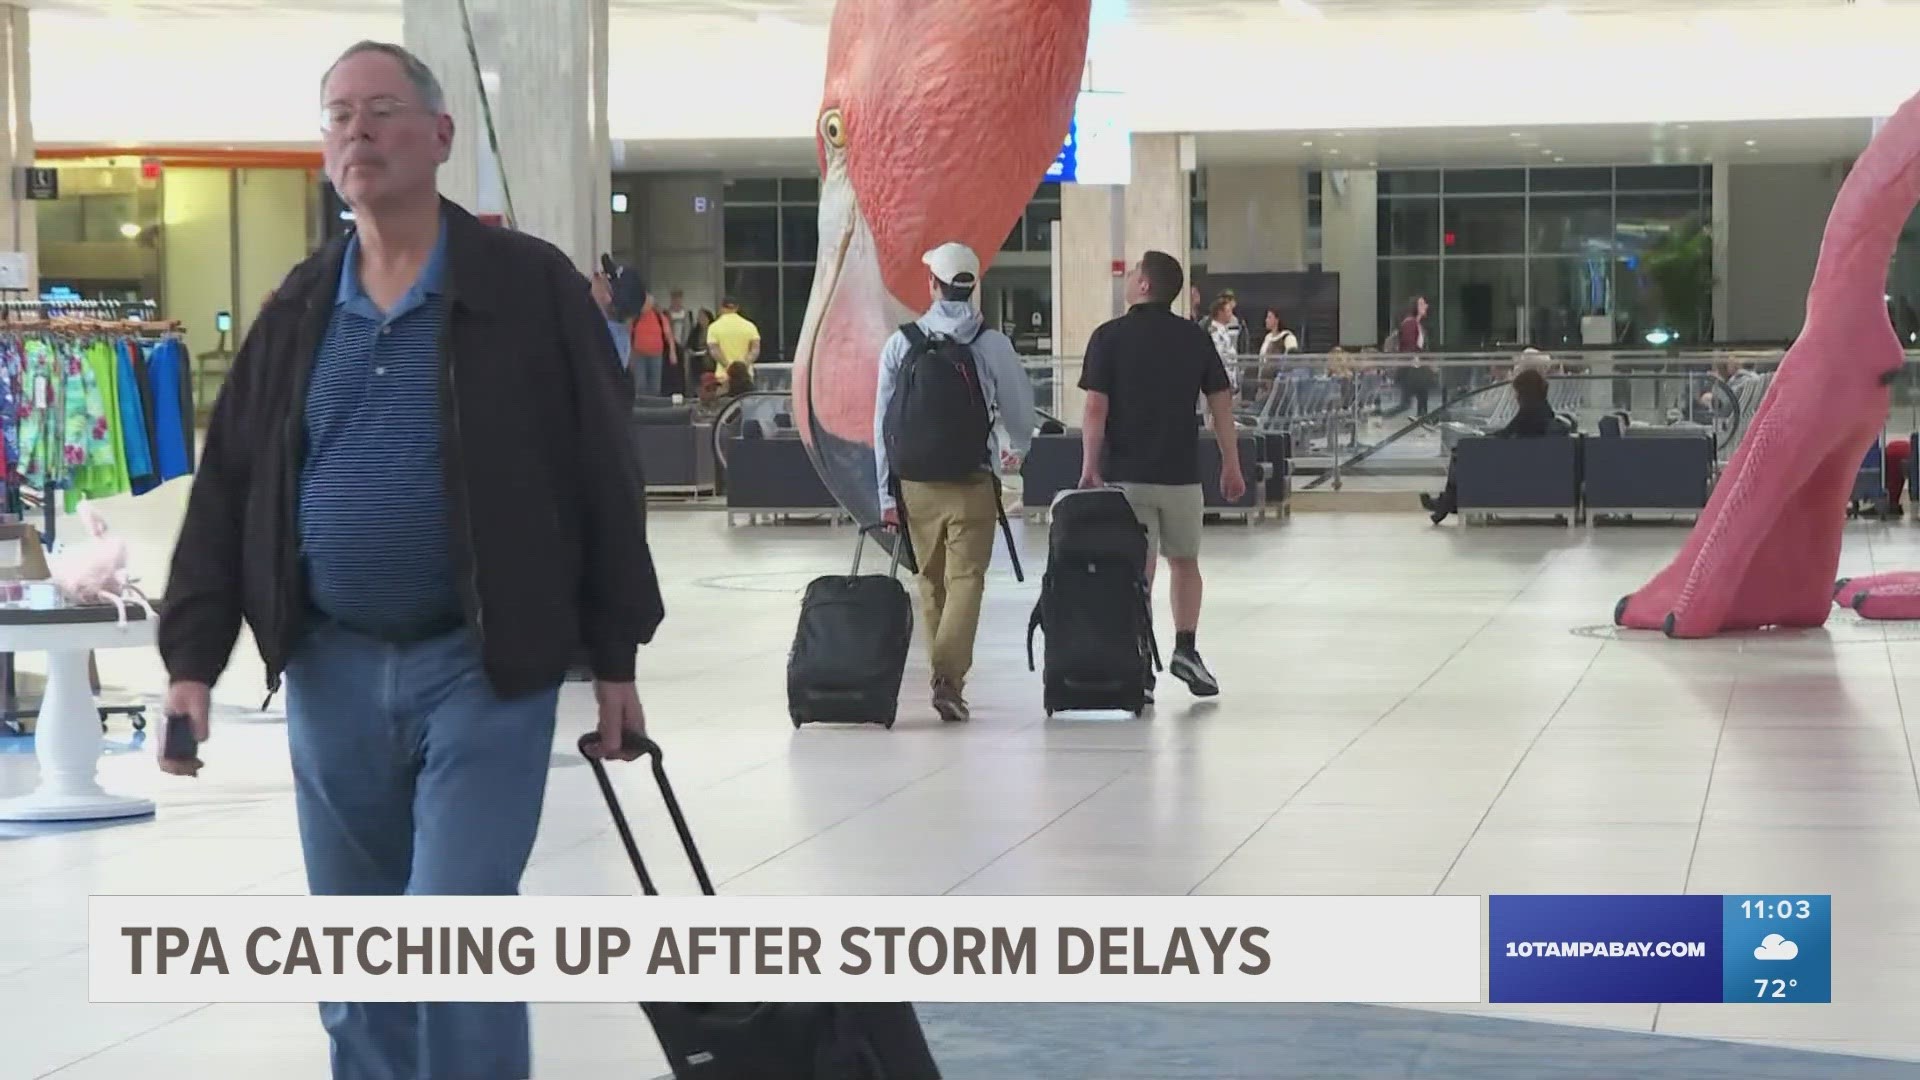 TPA also saw more than 40 cancellations.